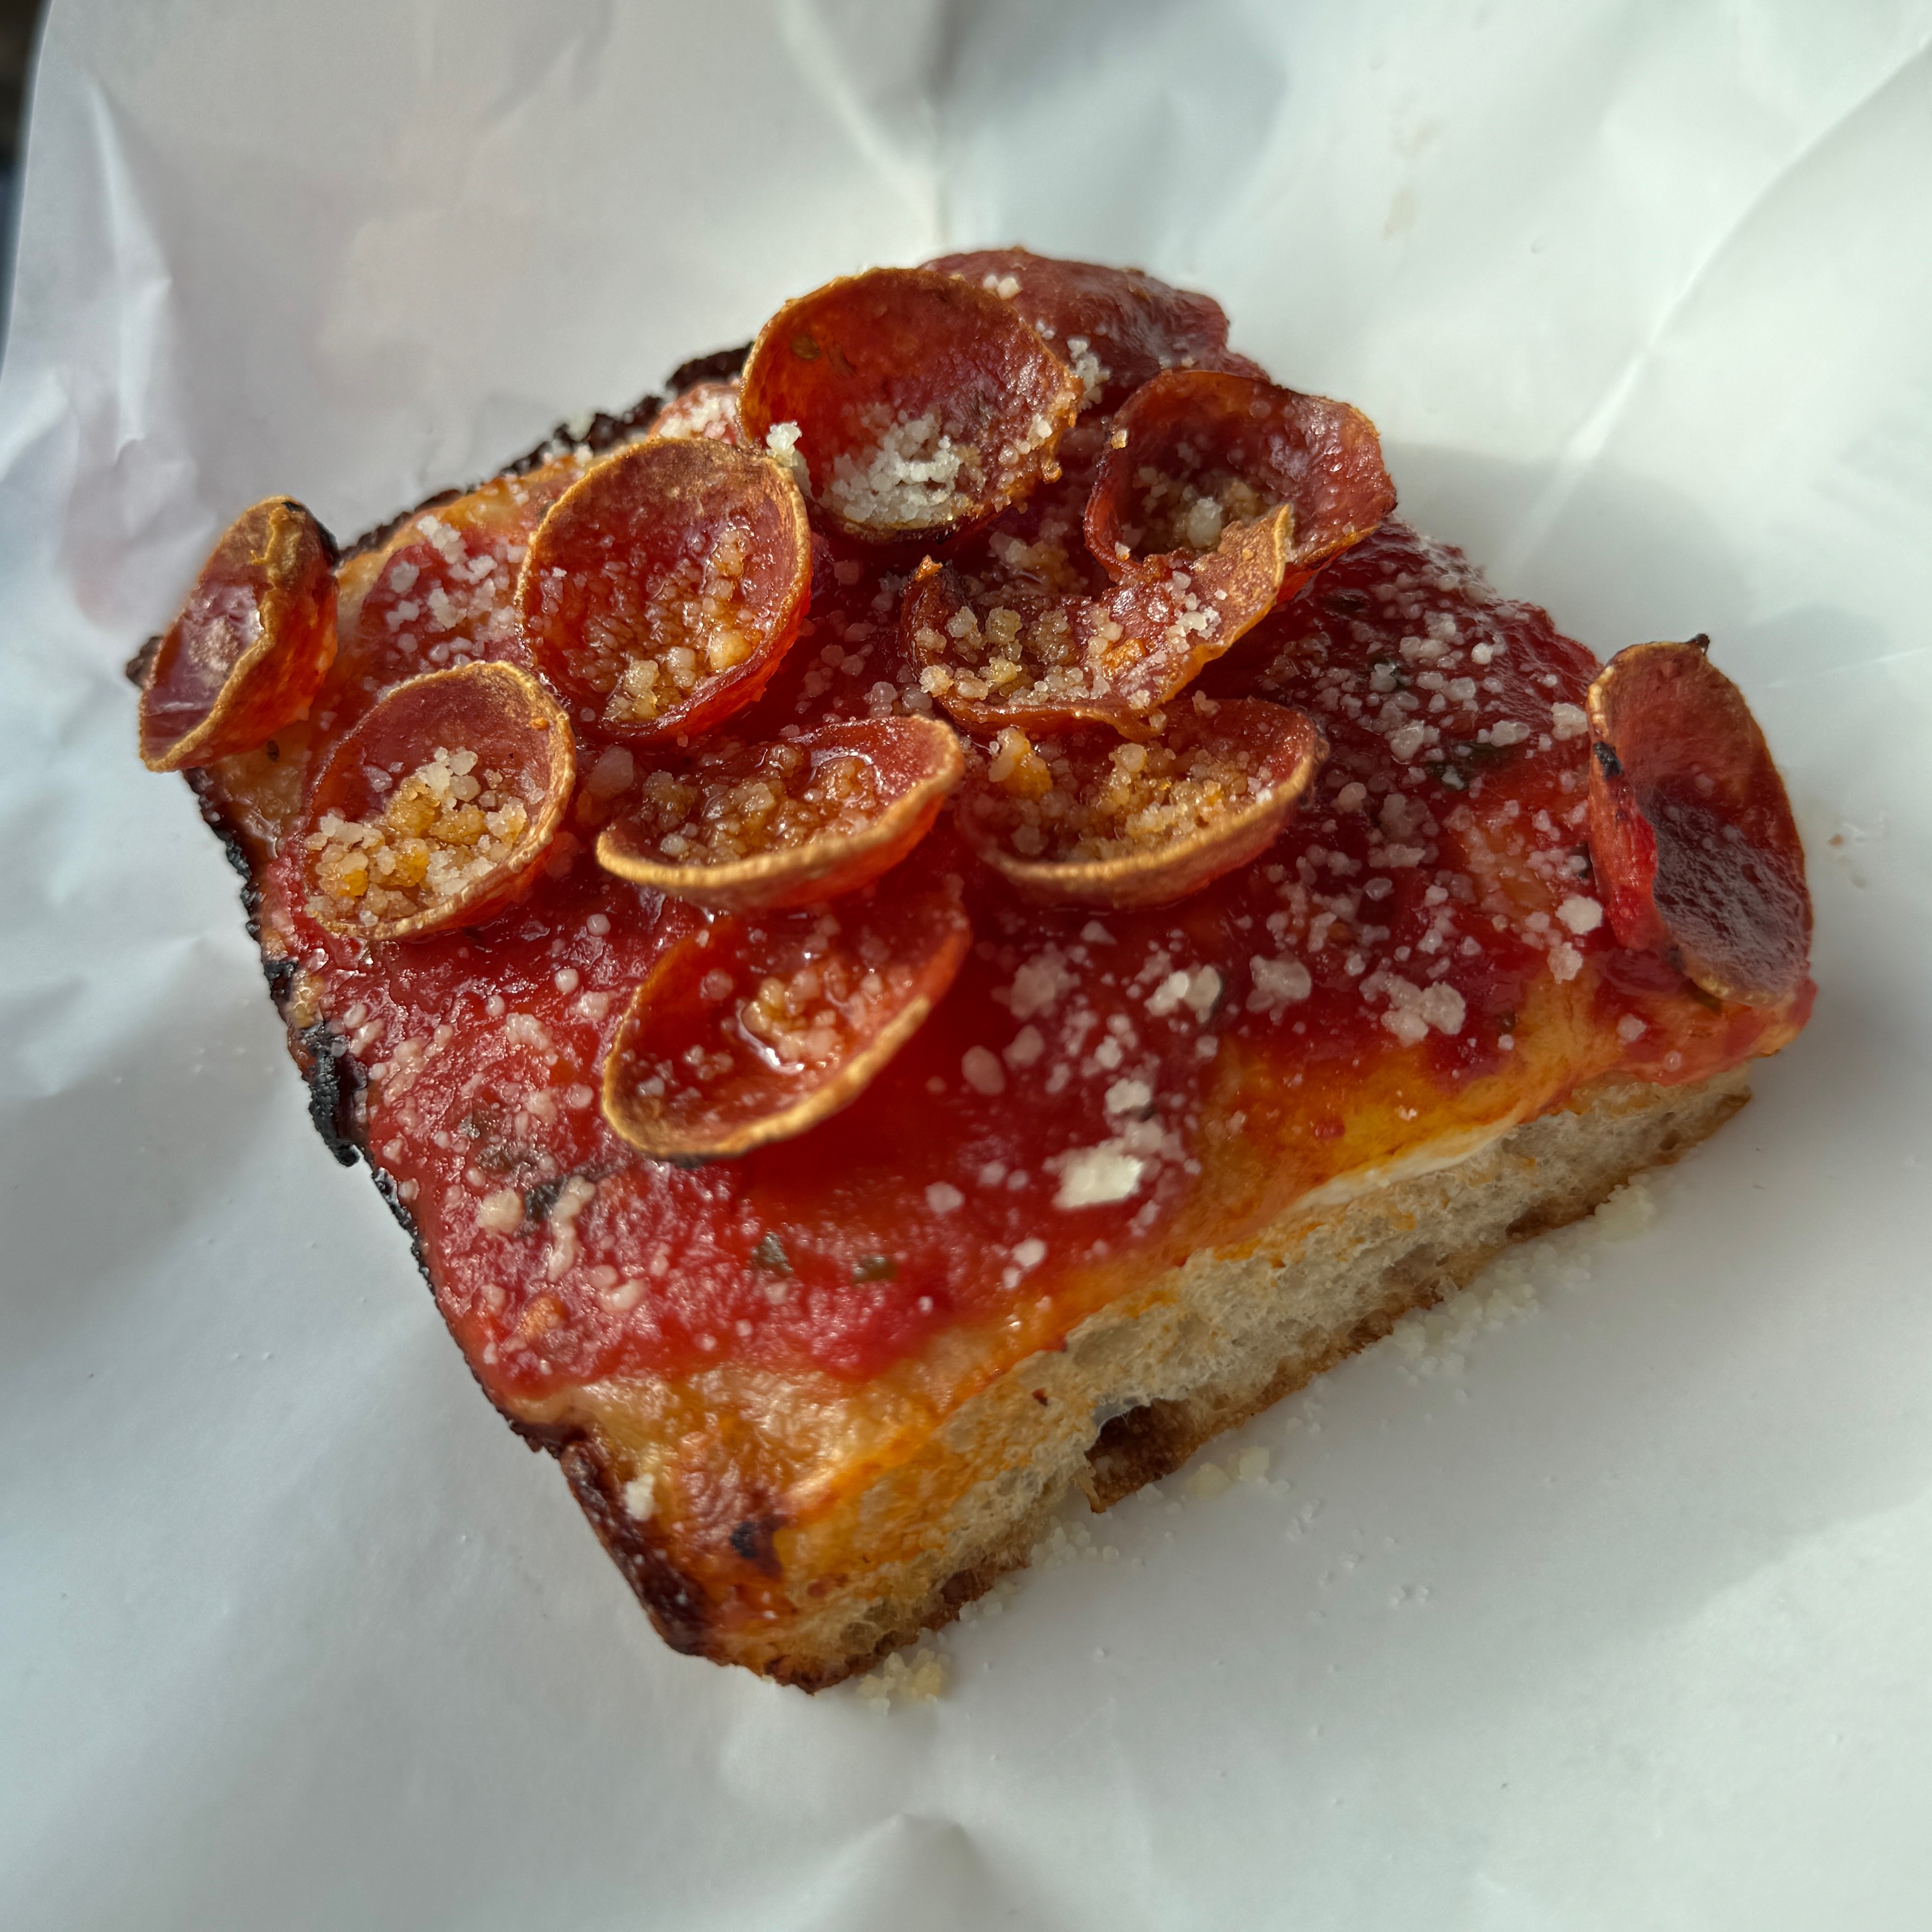 Pepperoni Slice $6.25 (was $5.50) from Quarter Sheets Pizza Club on #foodmento http://foodmento.com/dish/54718